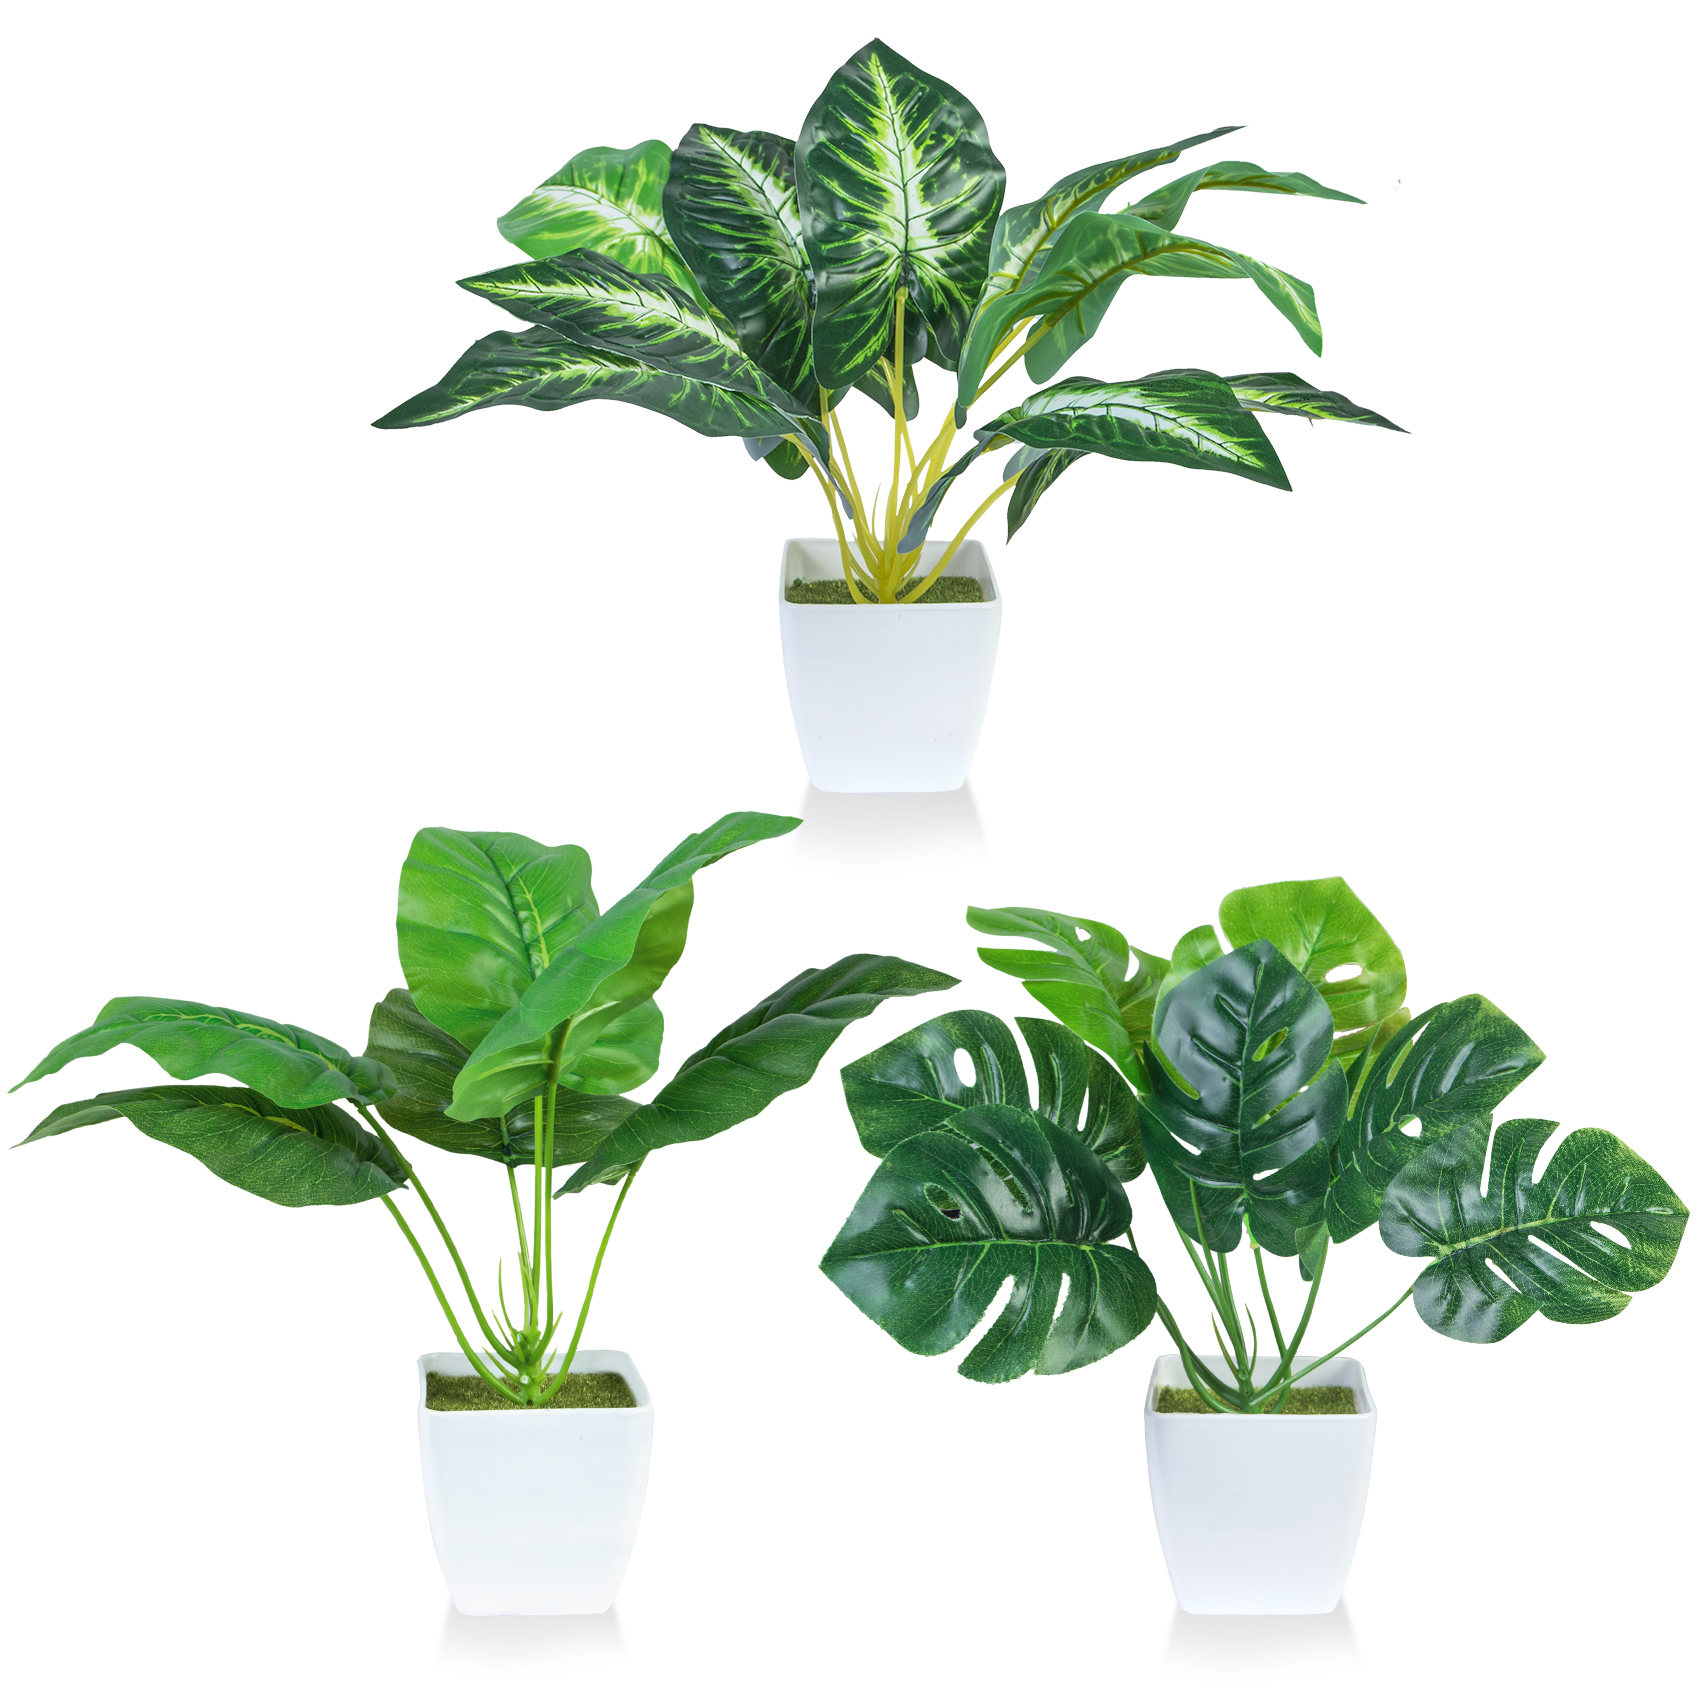 Ouddy Decor 3 Pack Small Fake Plants Artificial Mini Potted Plants Faux  Greenery Tabletop Artificial Plants for Desk Shelf Bathroom Office Home  Indoor Decor [Ouddy Decor] - $16.99 : Ouddy, Ouddy Shopping Online!